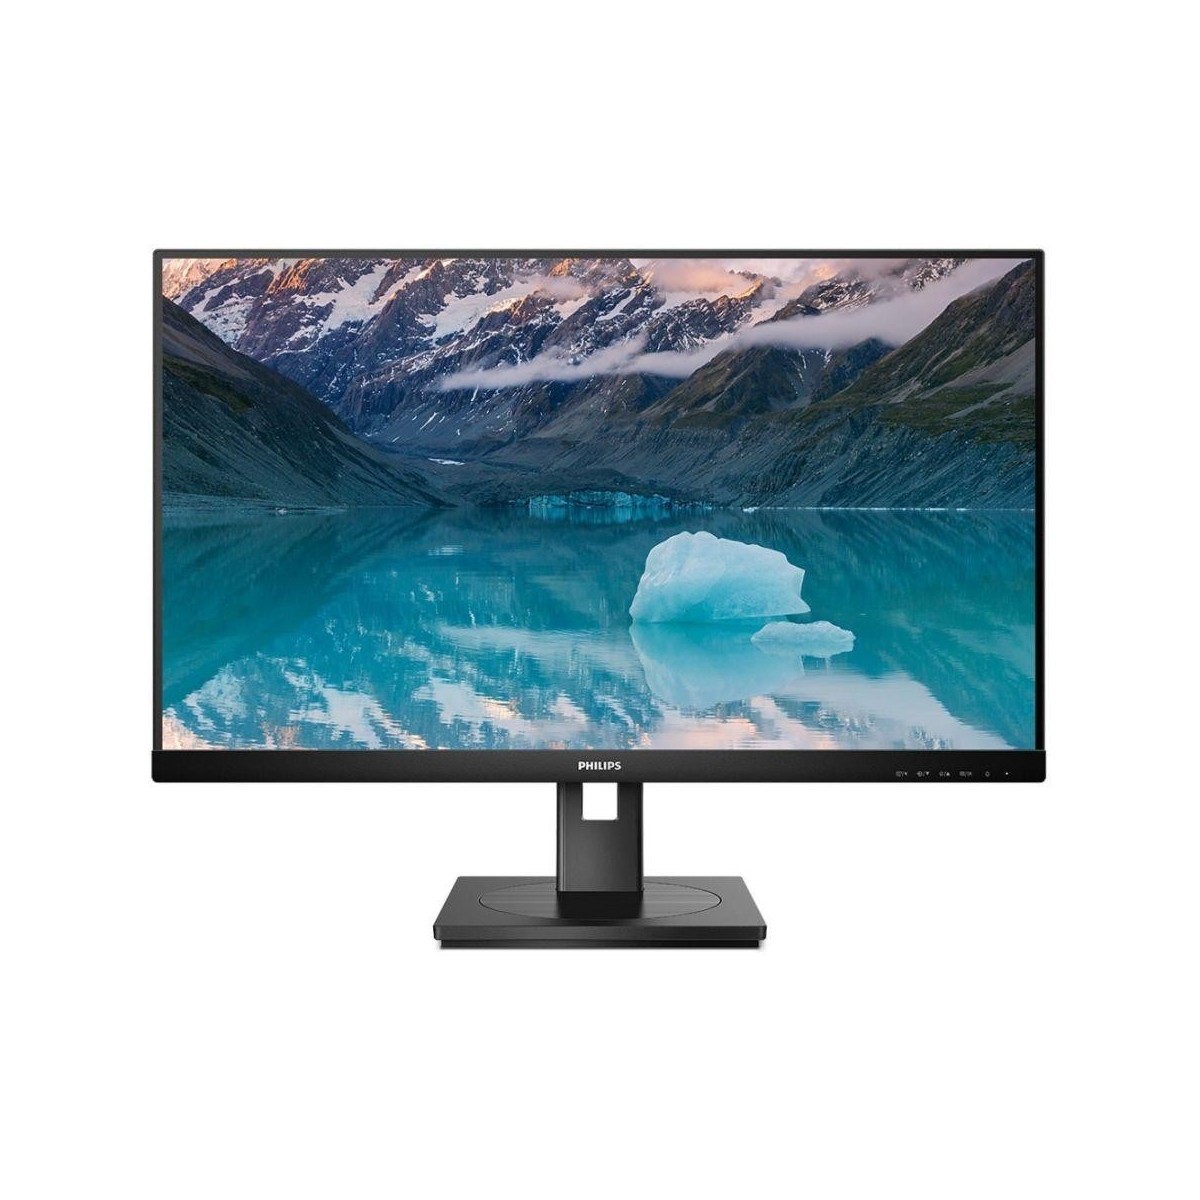 Philips 21.5IN 16:9 1920X1080 4MS - 4 ms - 3,000:1